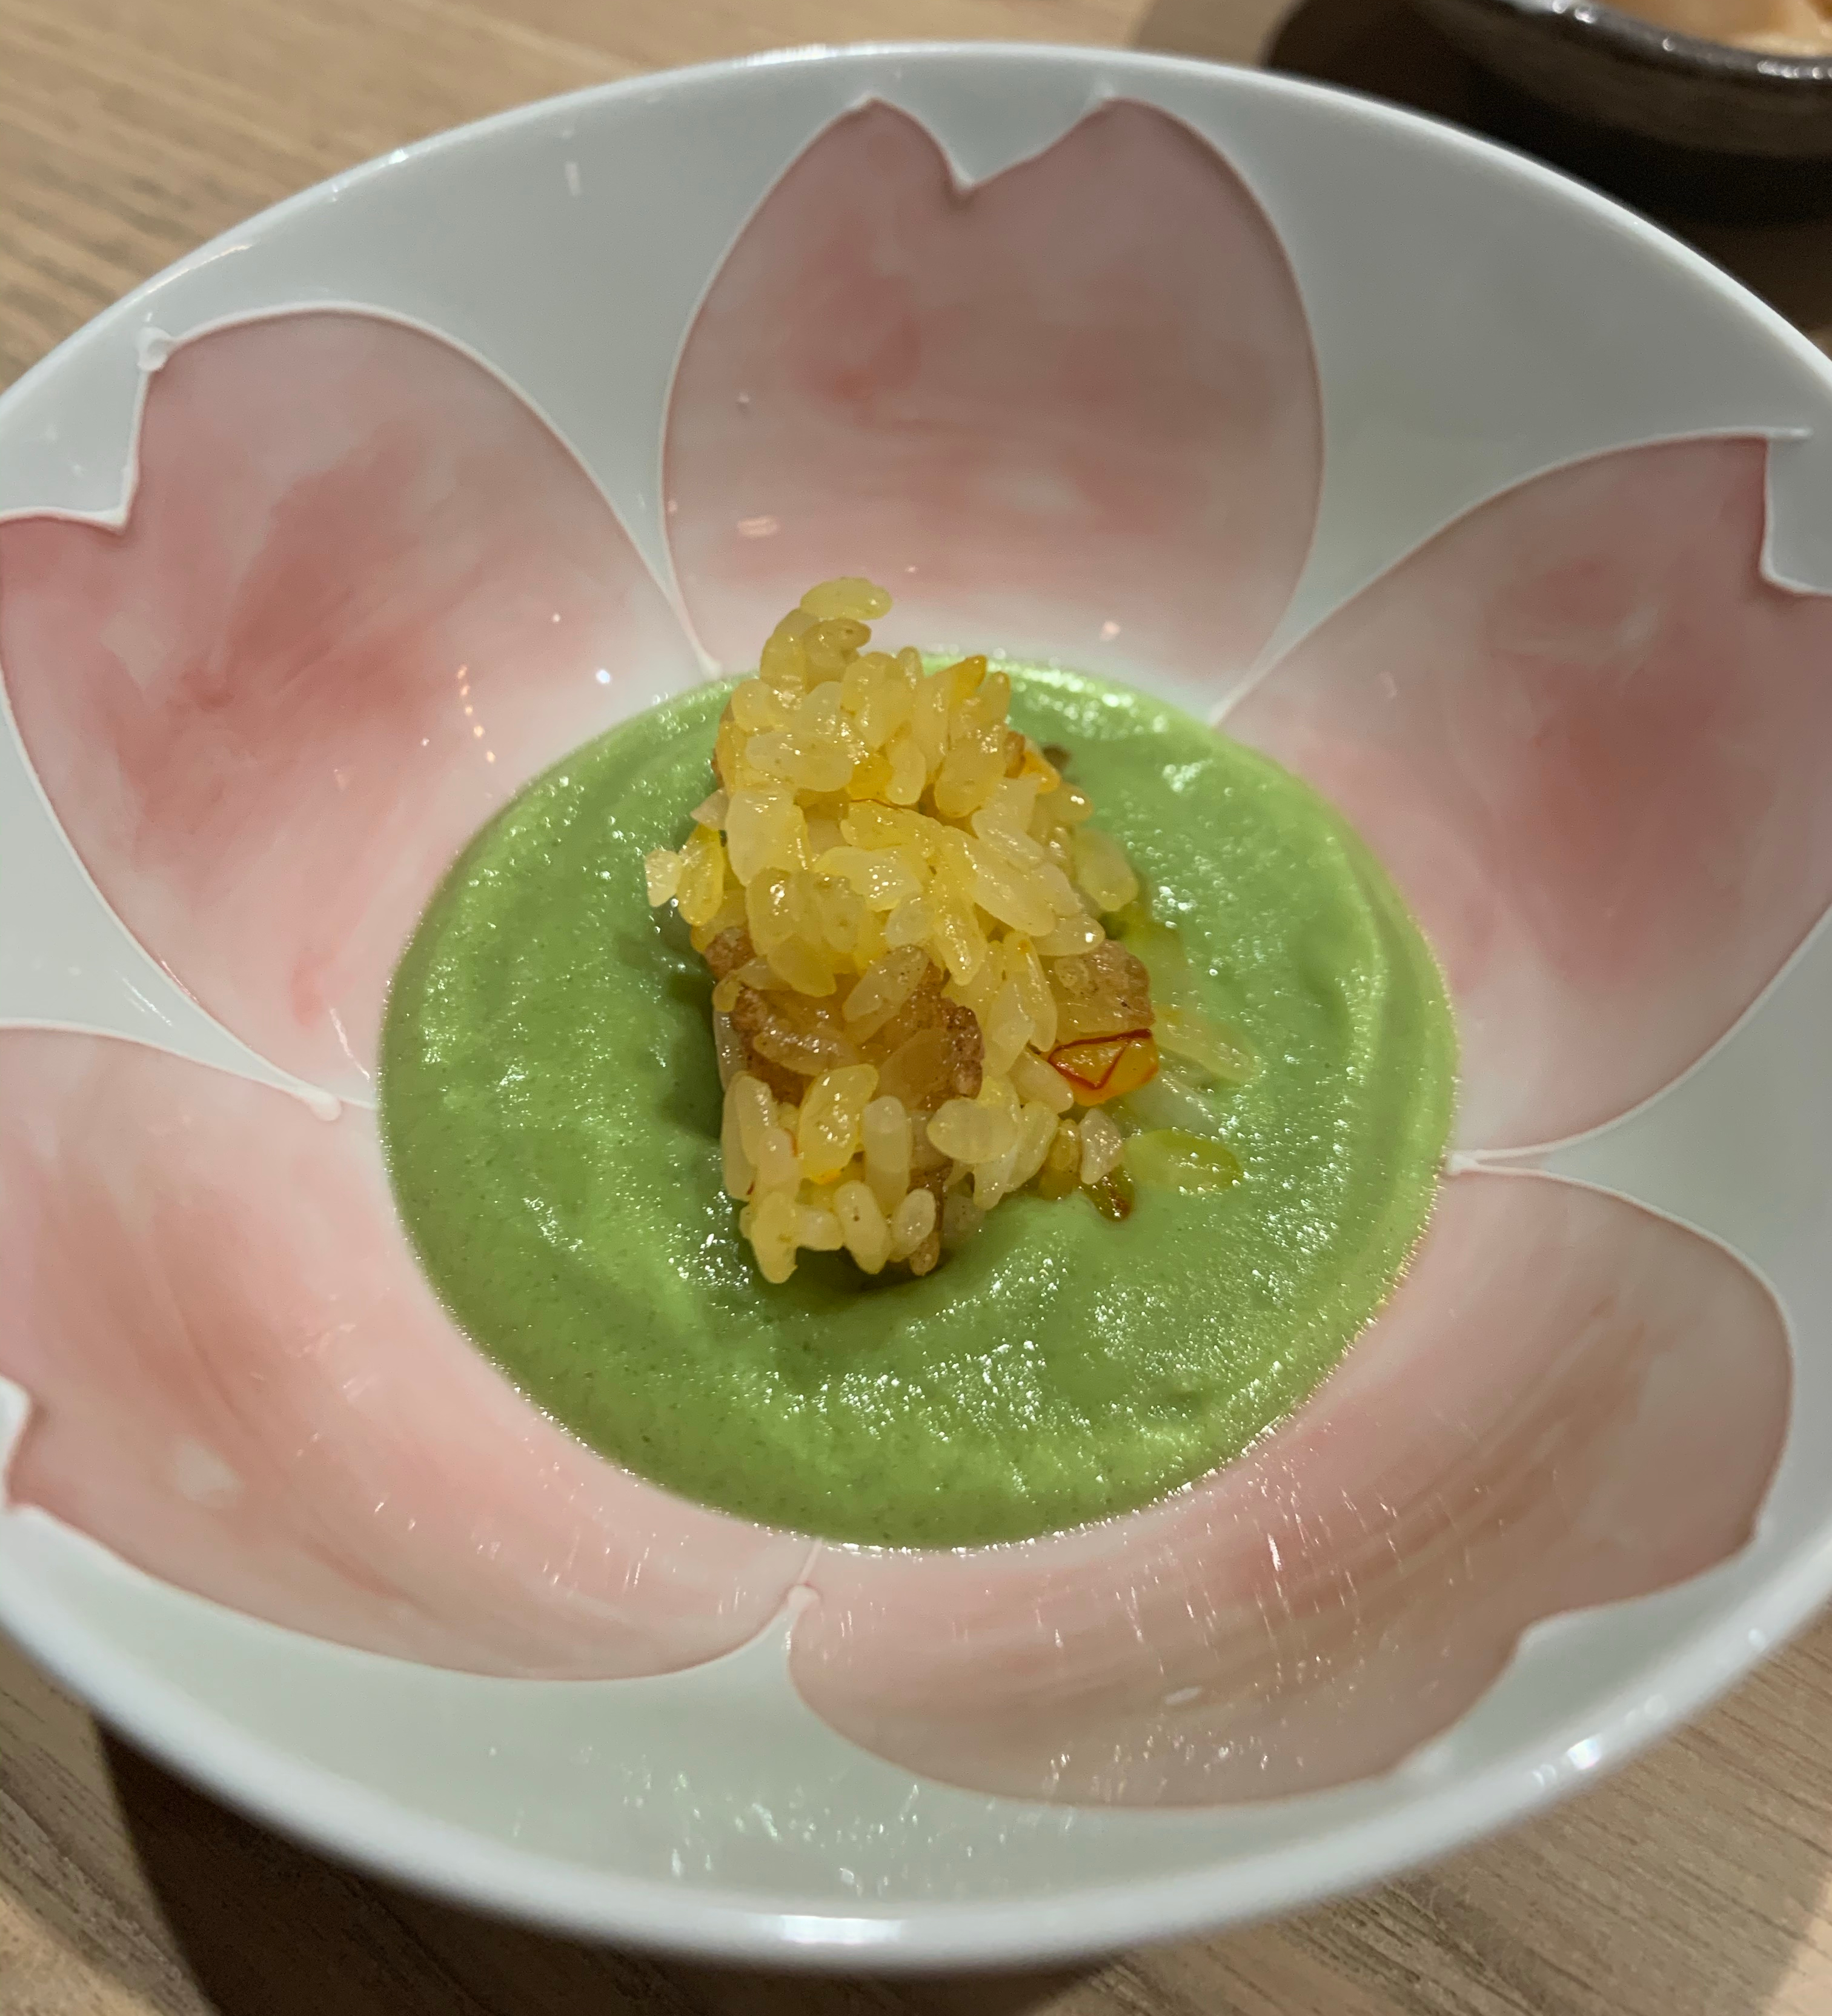 Large bowl with a vaguely-flower-looking motif. There is a circle of green pea puree, and some yellow-tinted rice is in the center of the puree.